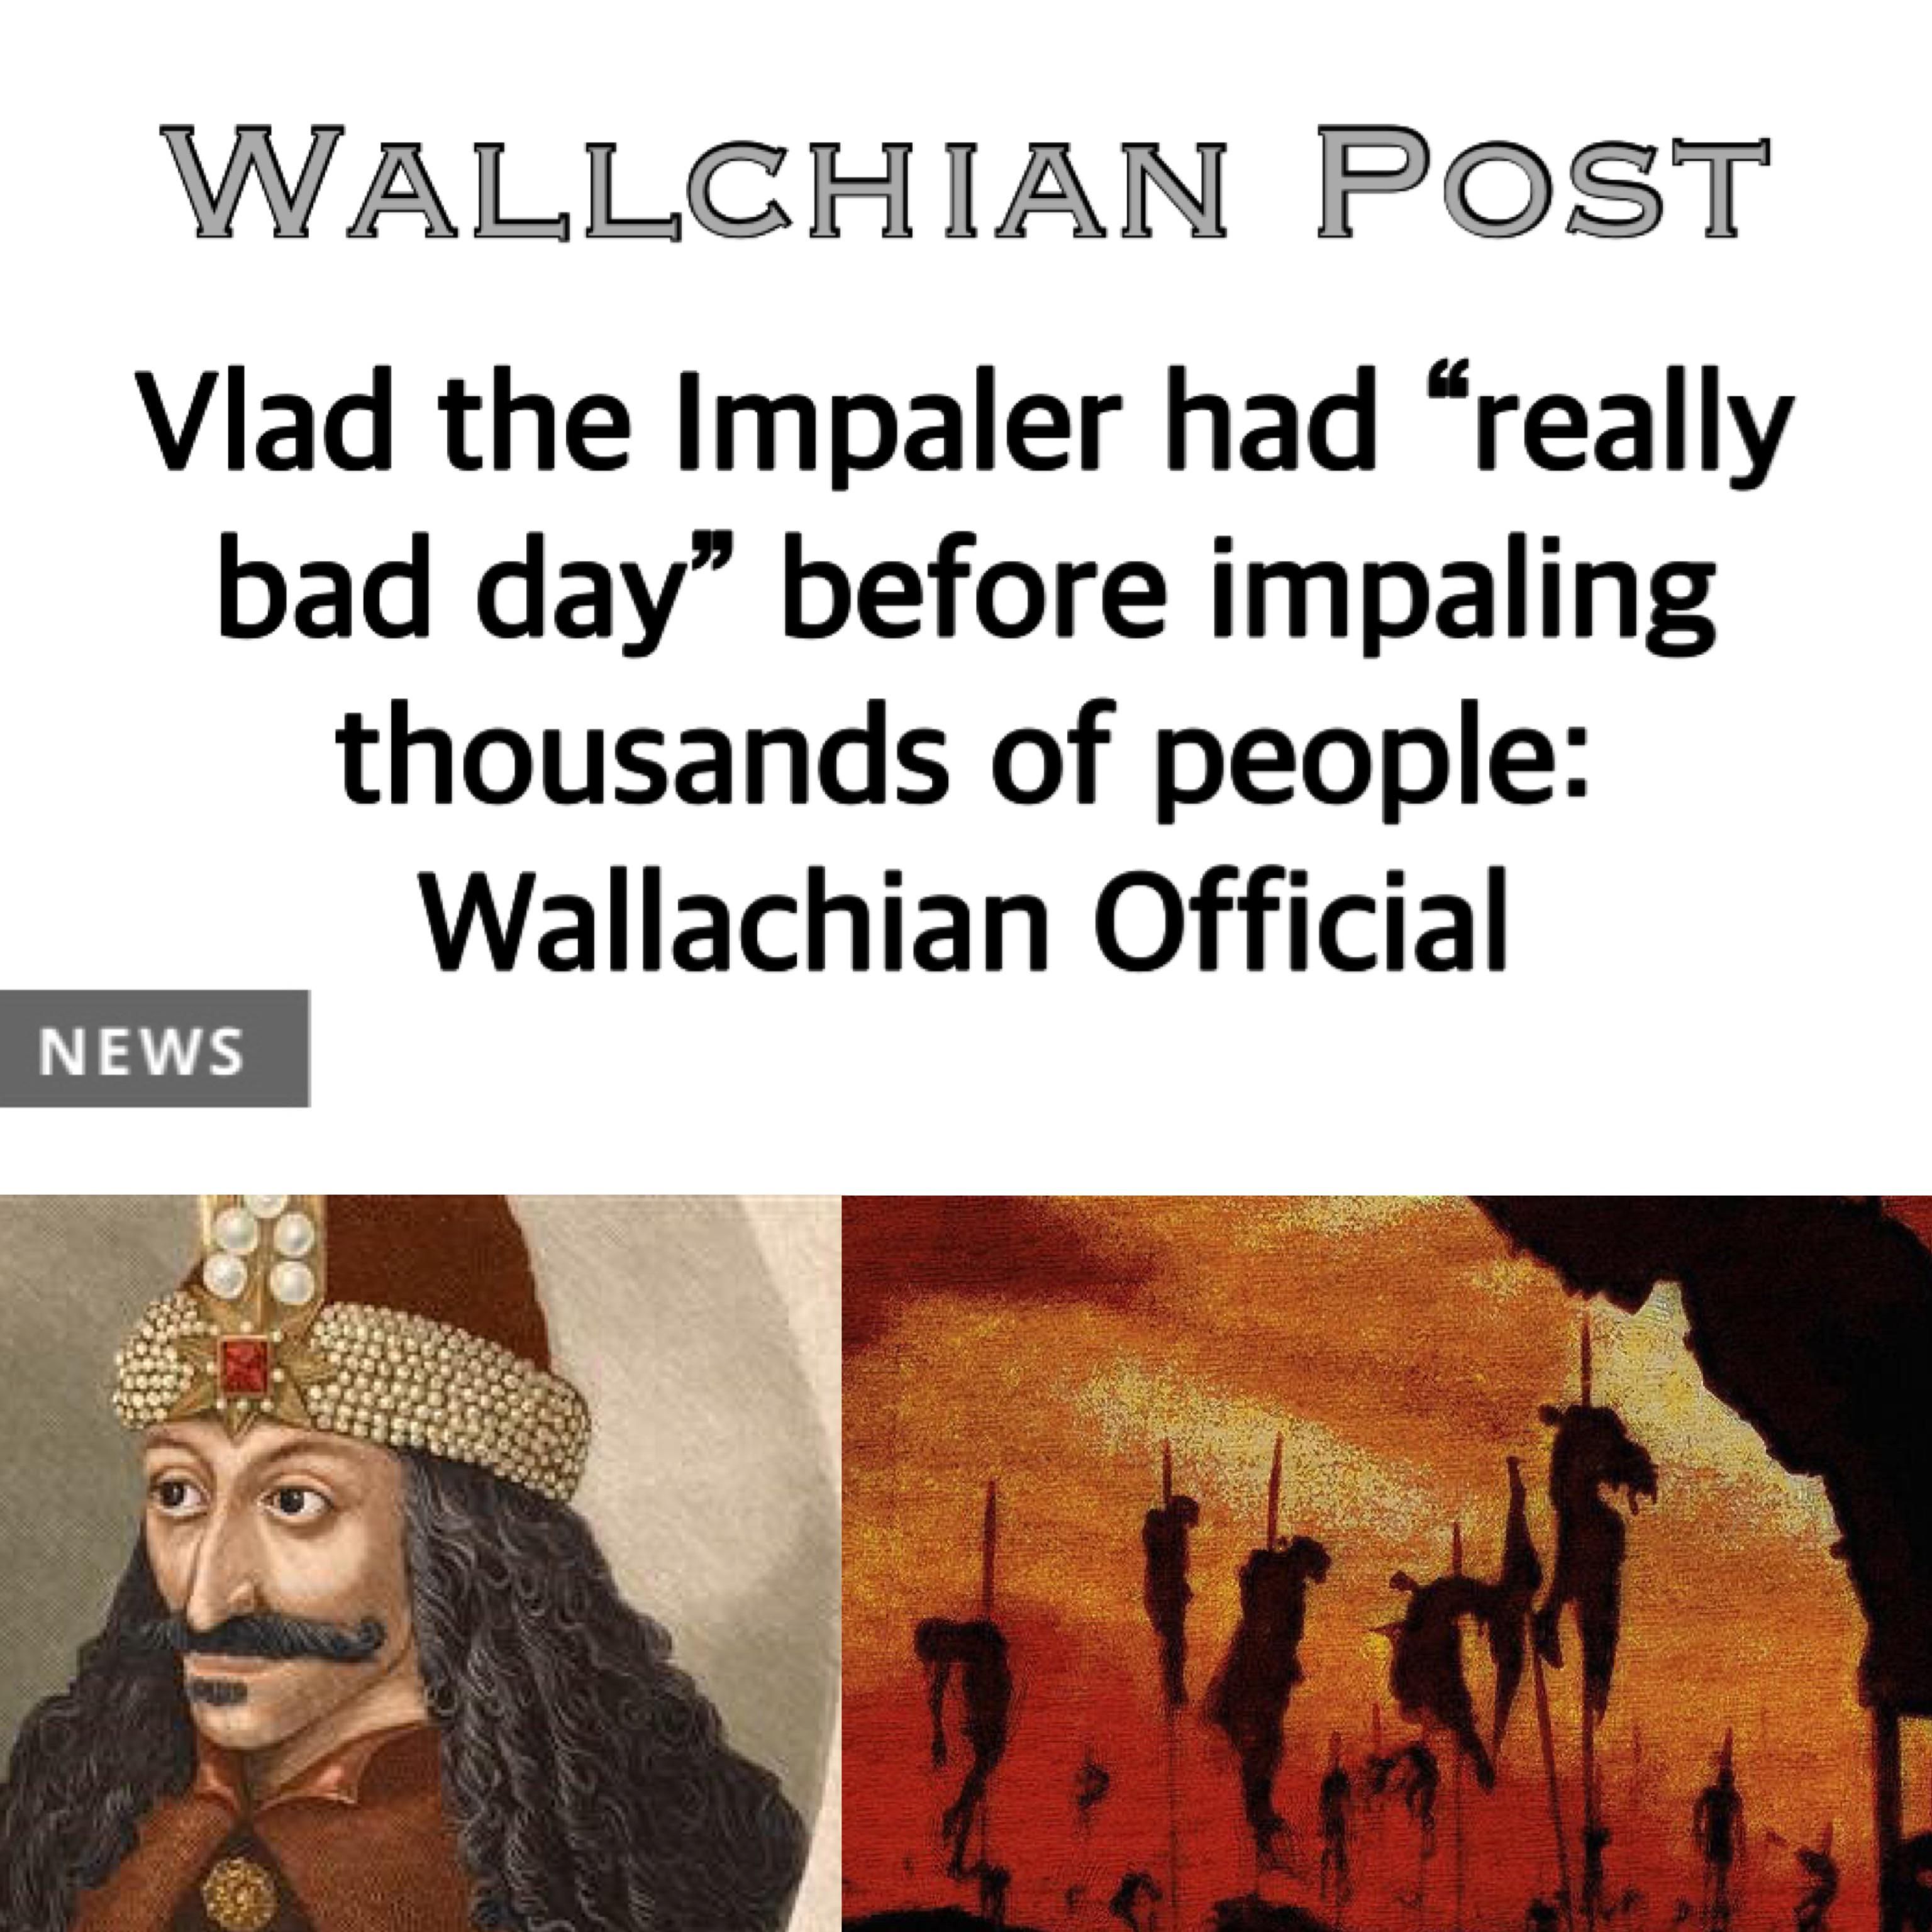 Thoughts and prayers for Vlad, he really needs our support